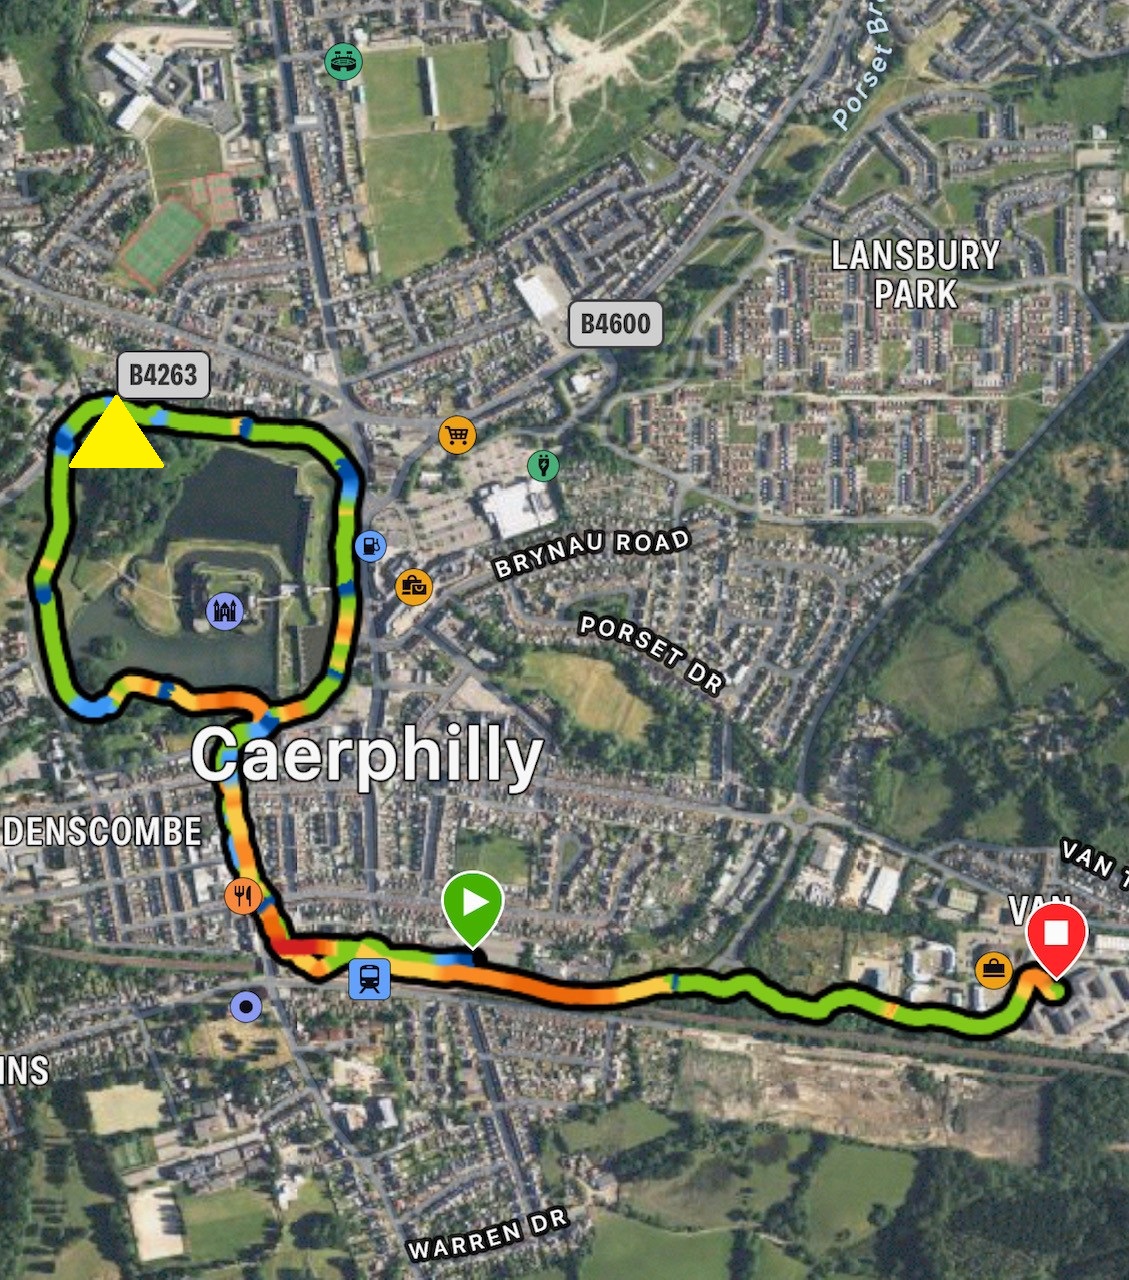 Satellite image of a walk between Welsh ICE and Caerphilly Castle.